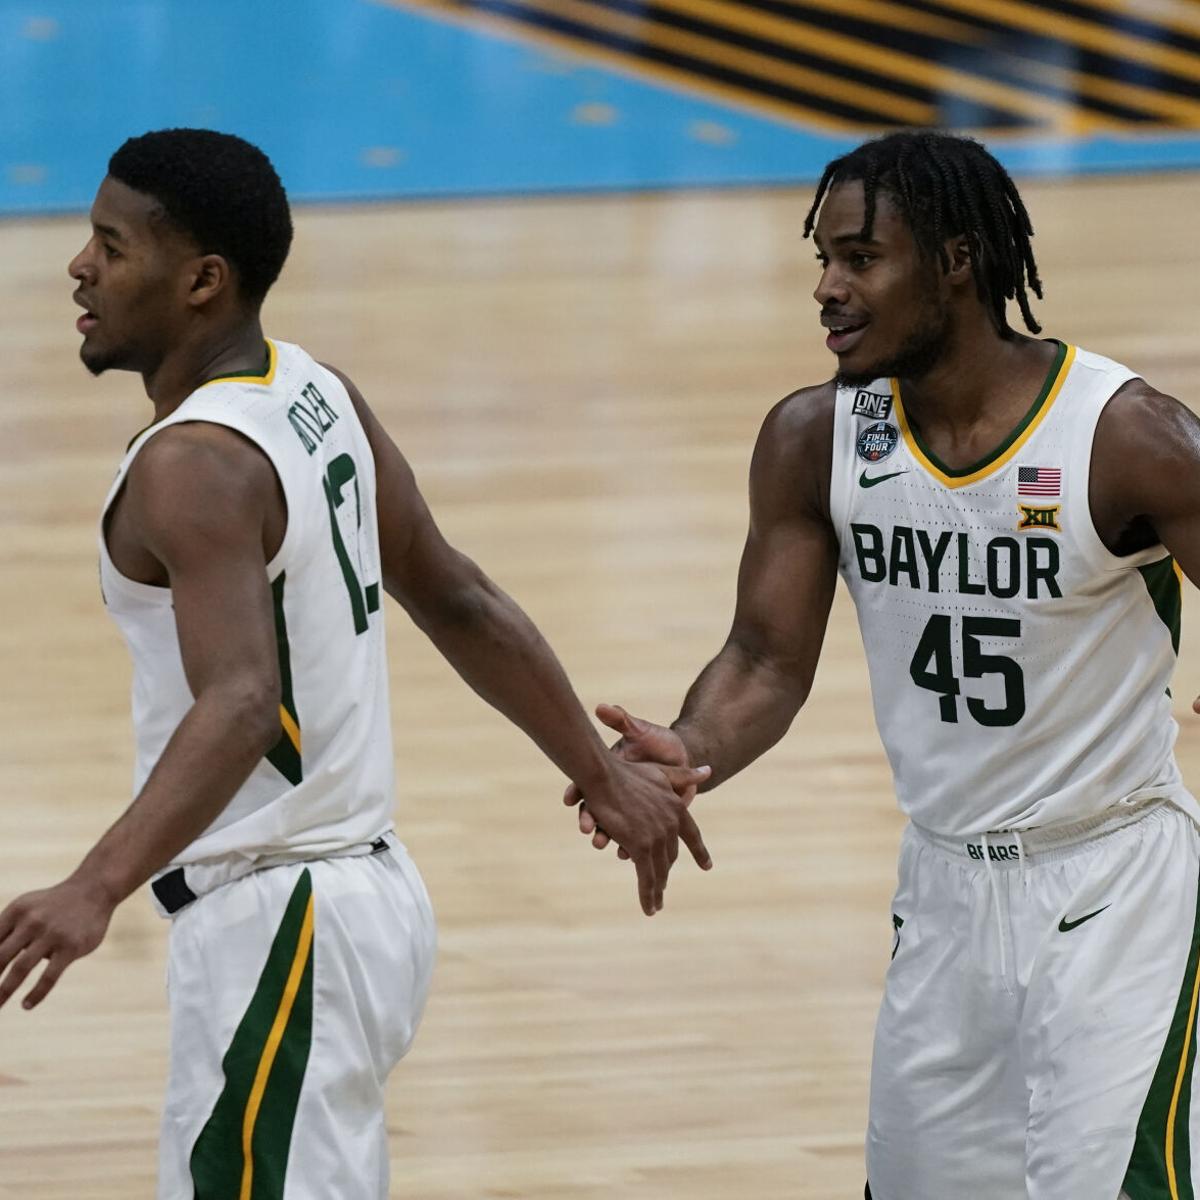 NBA Draft Day dreams materializing for Baylor's Butler, Mitchell | Baylor |  wacotrib.com